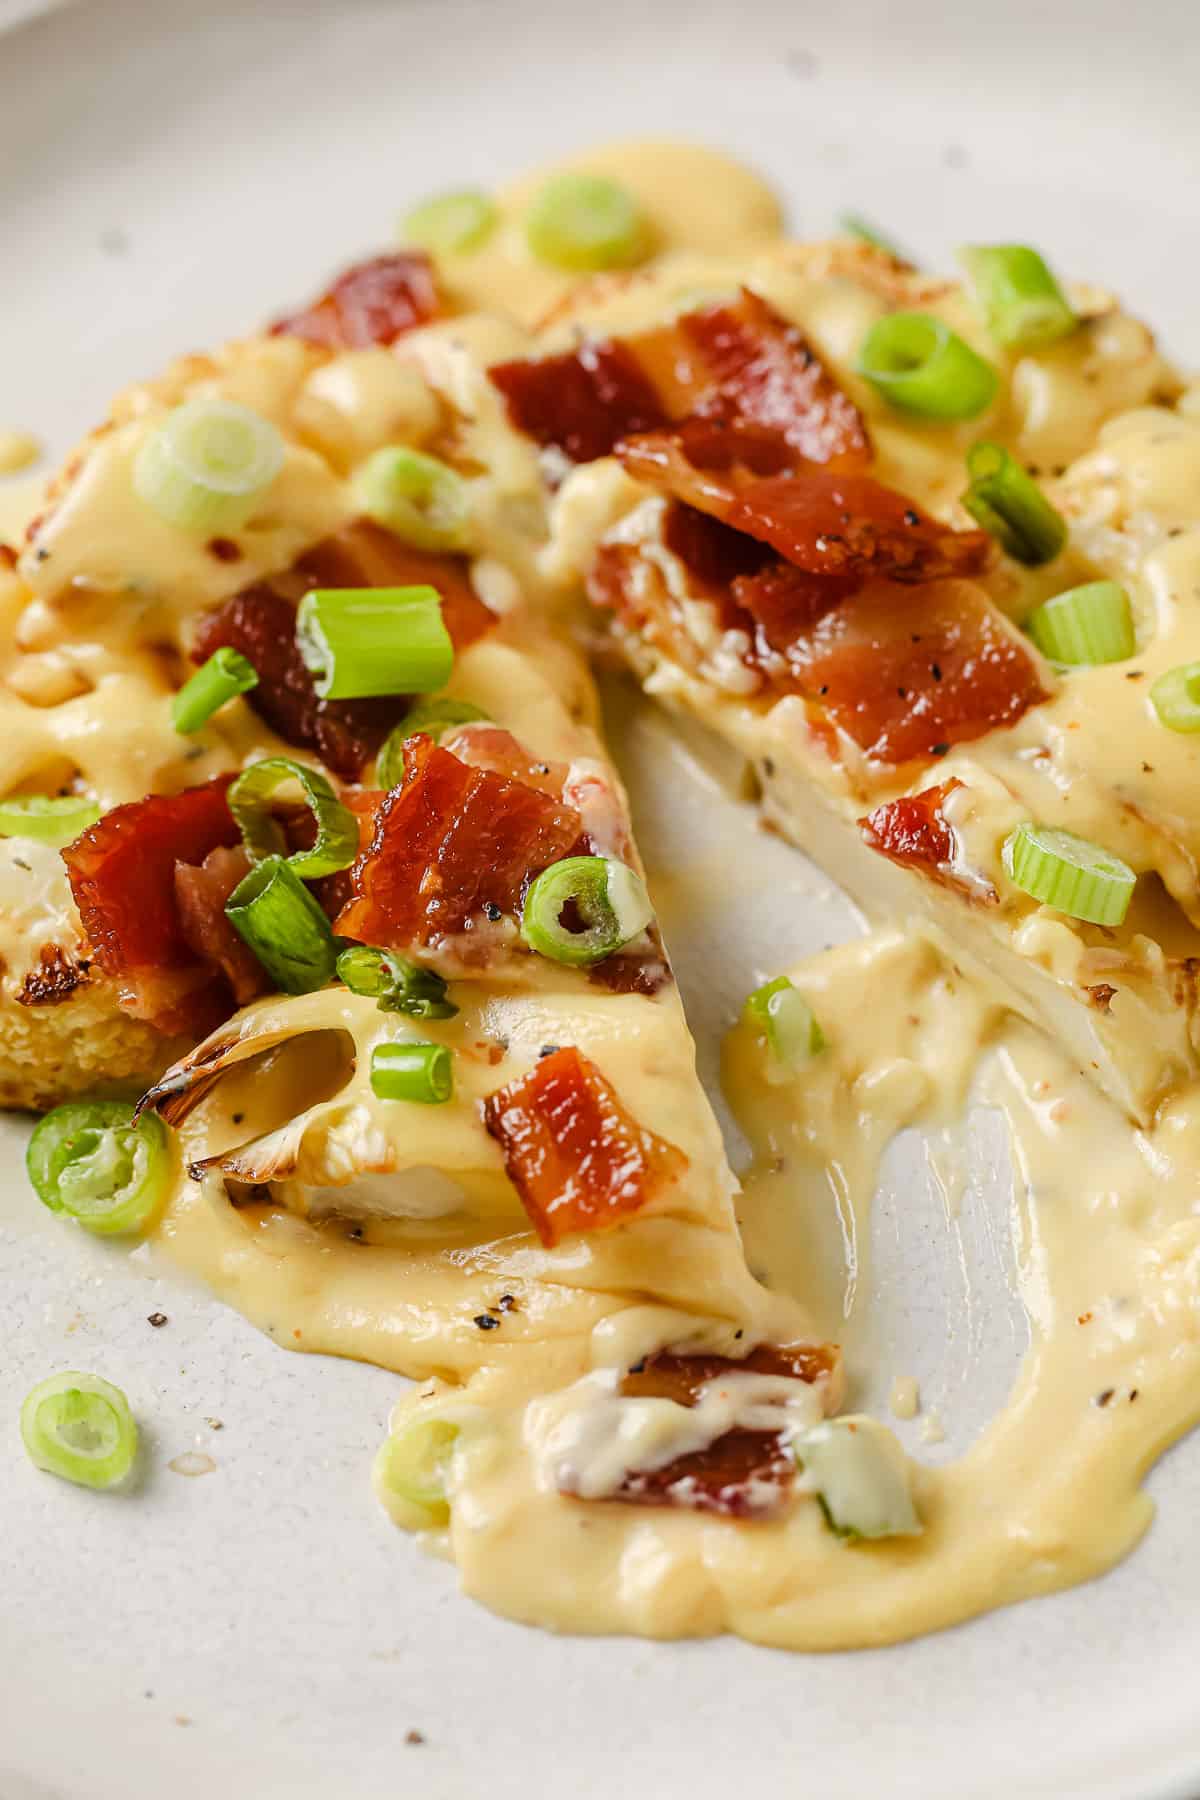 oven roasted cauliflower steaks, topped with cheese sauce, bacon, and green onions